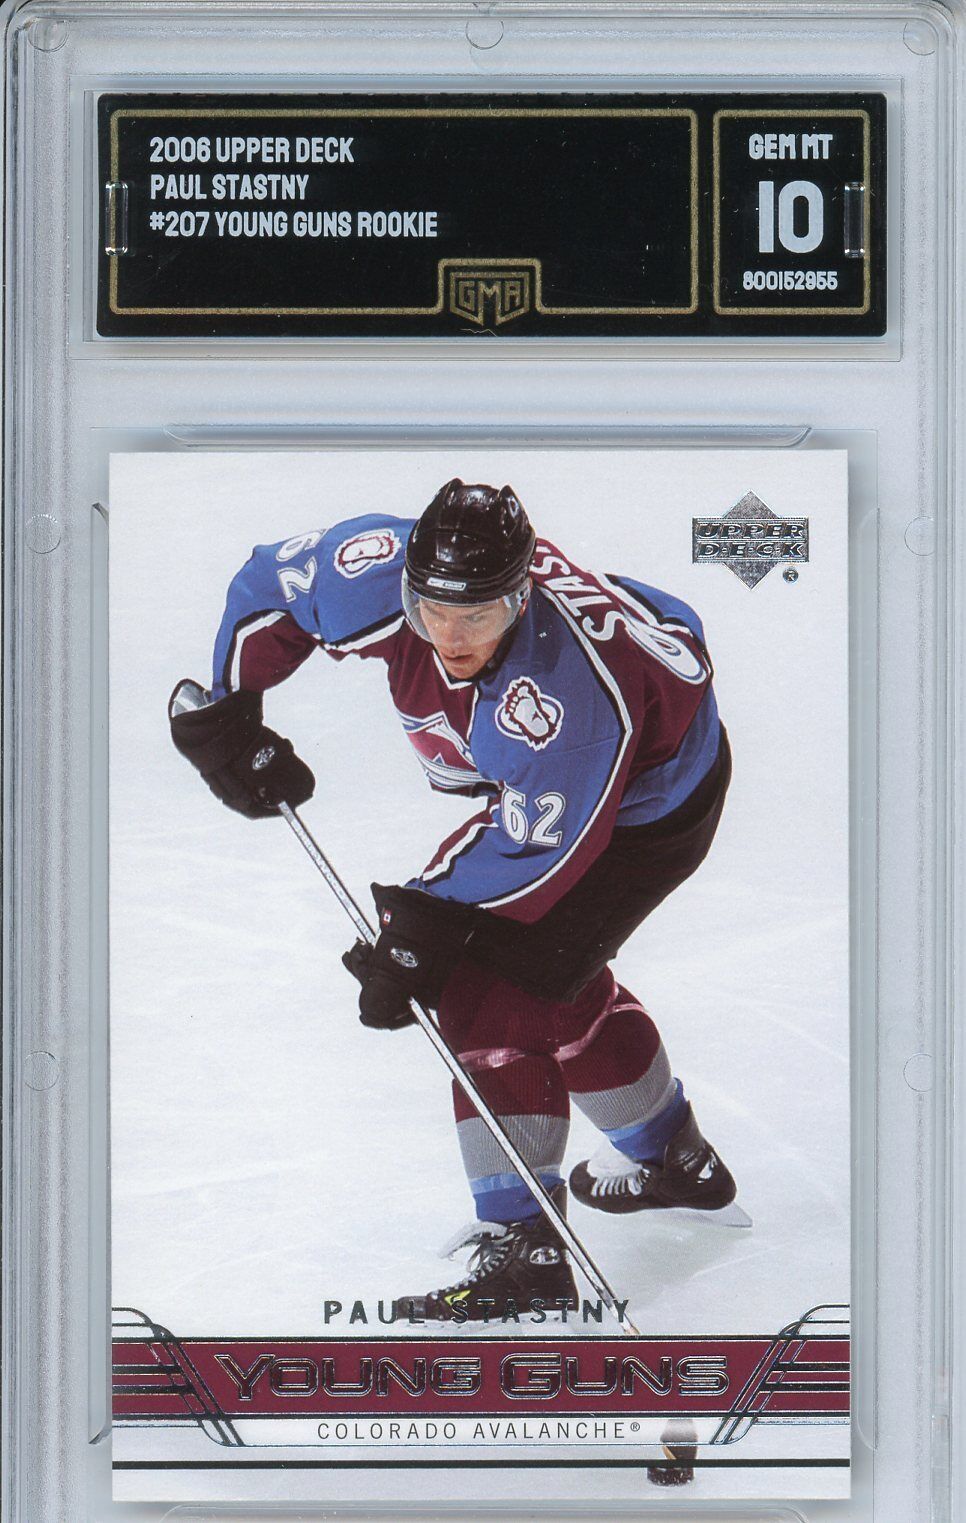 2008 Upper Deck Paul Stastny #207 Young Guns Rookie GMA 10